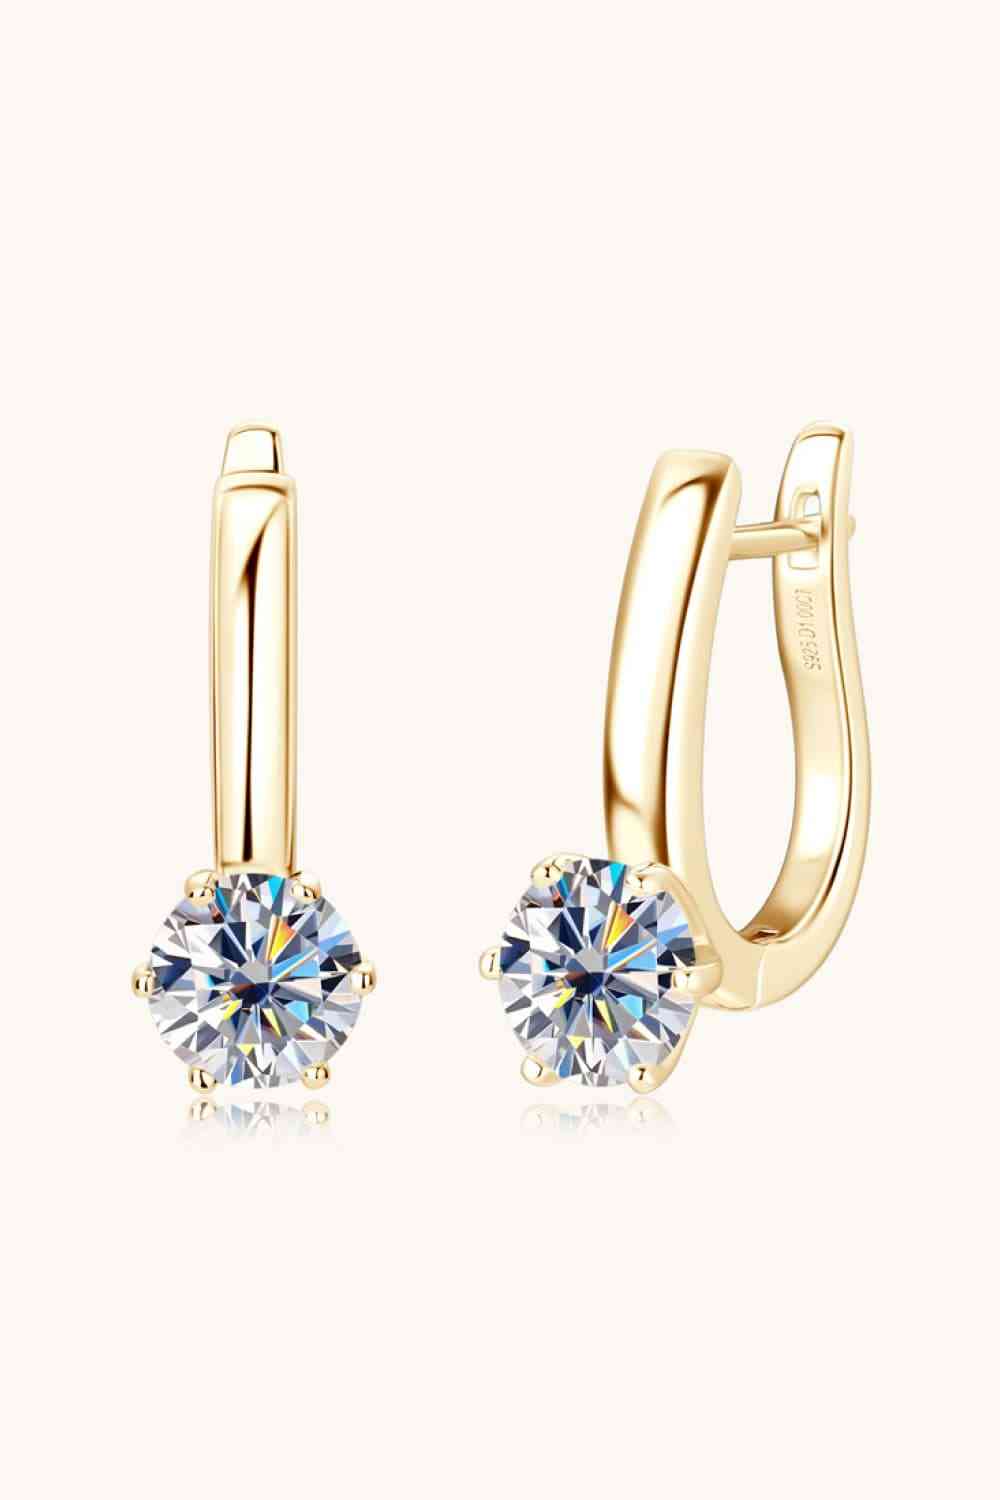 2 Carat Moissanite 925 Sterling Silver Earrings Gold One Size